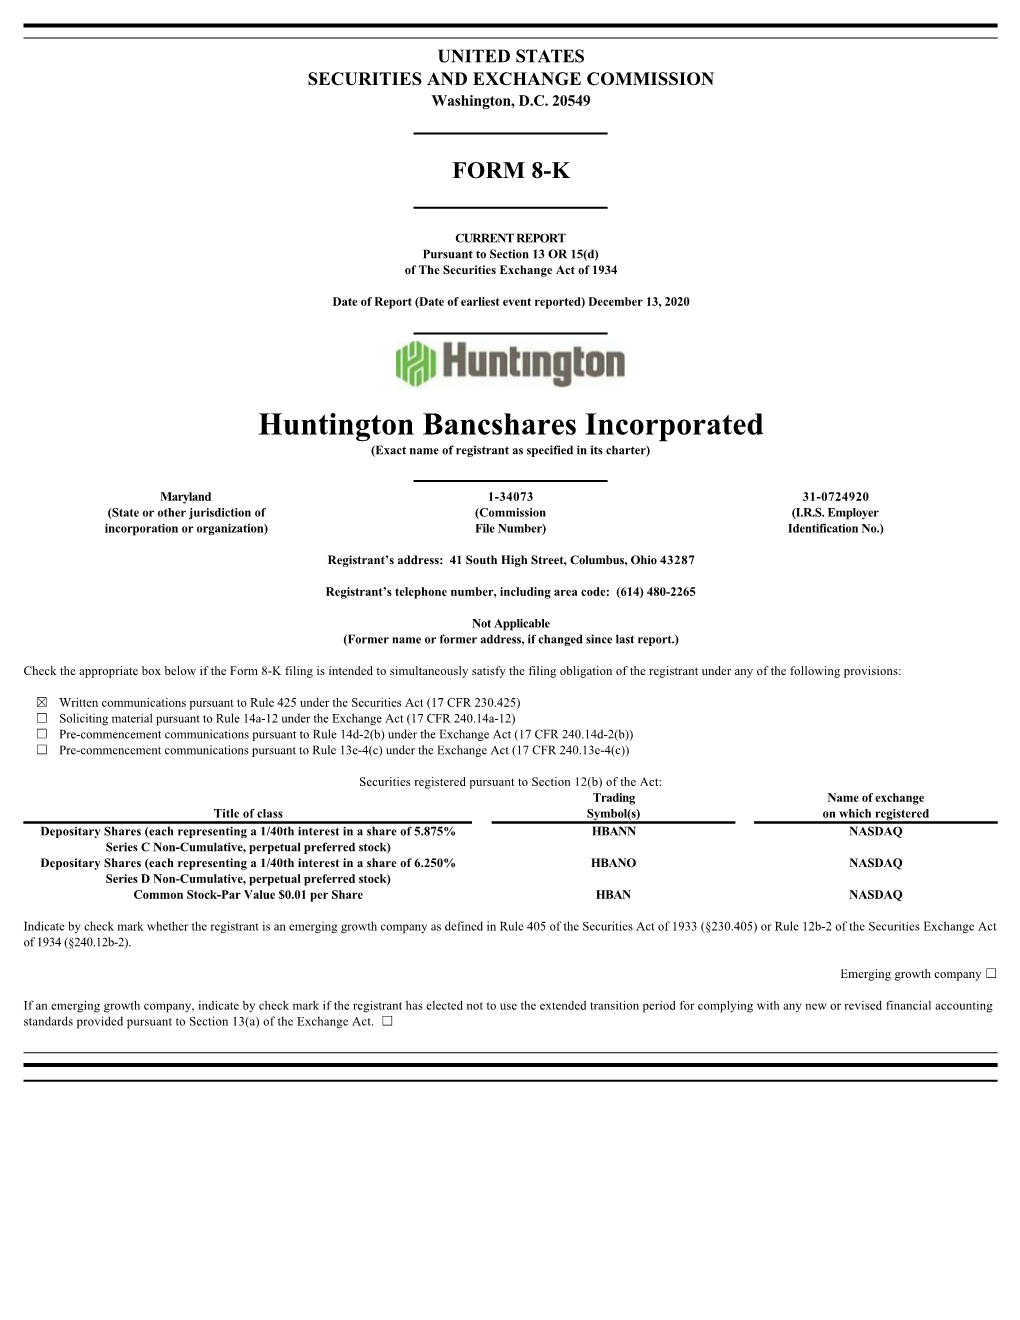 Huntington Bancshares Incorporated Investor Relations